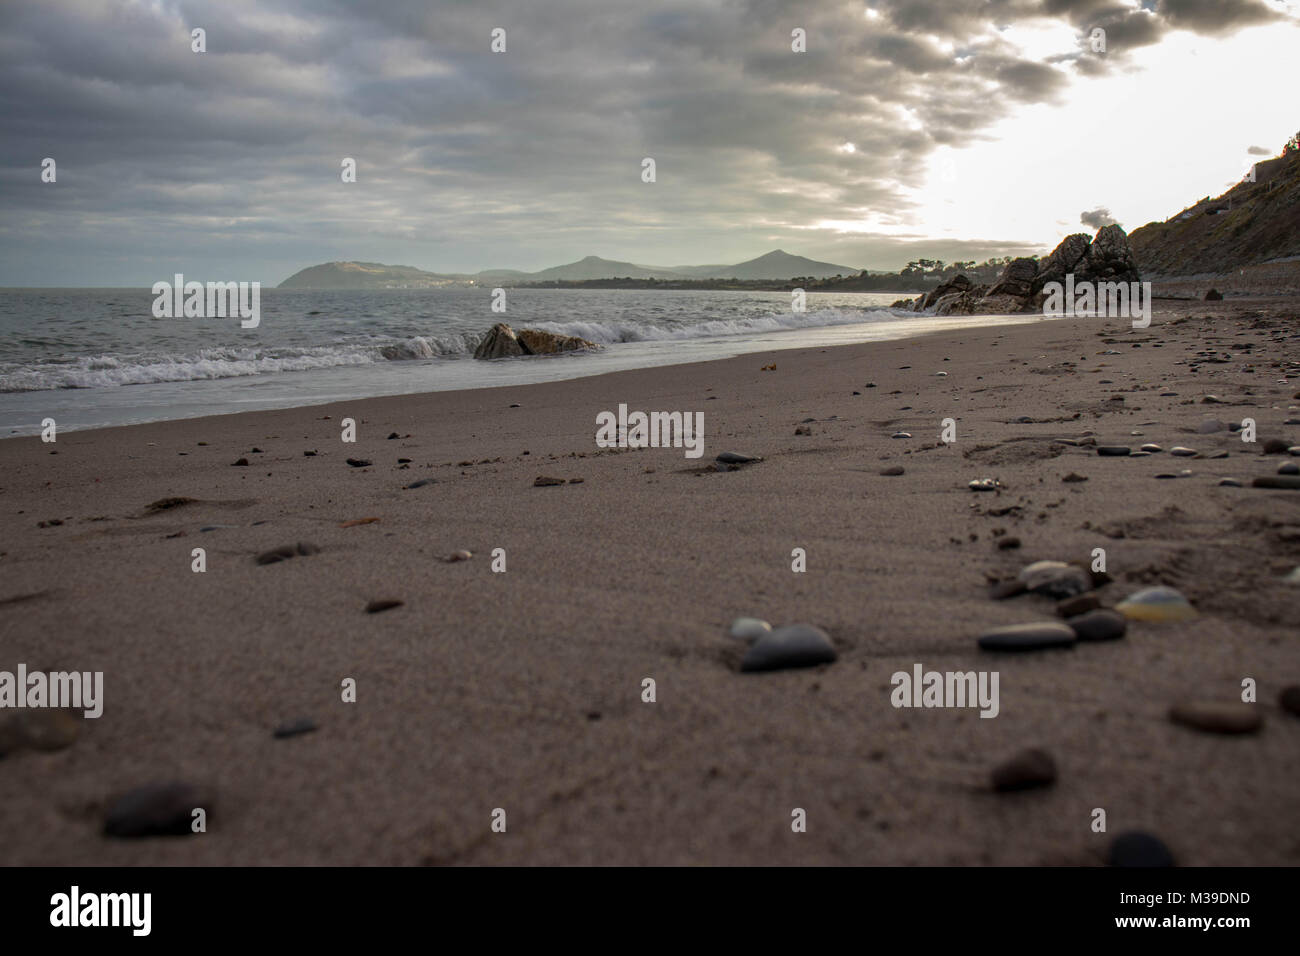 A view of Killing Bay at Golden Hour, looking at Bray Head and the Sugar Loaf. Stock Photo